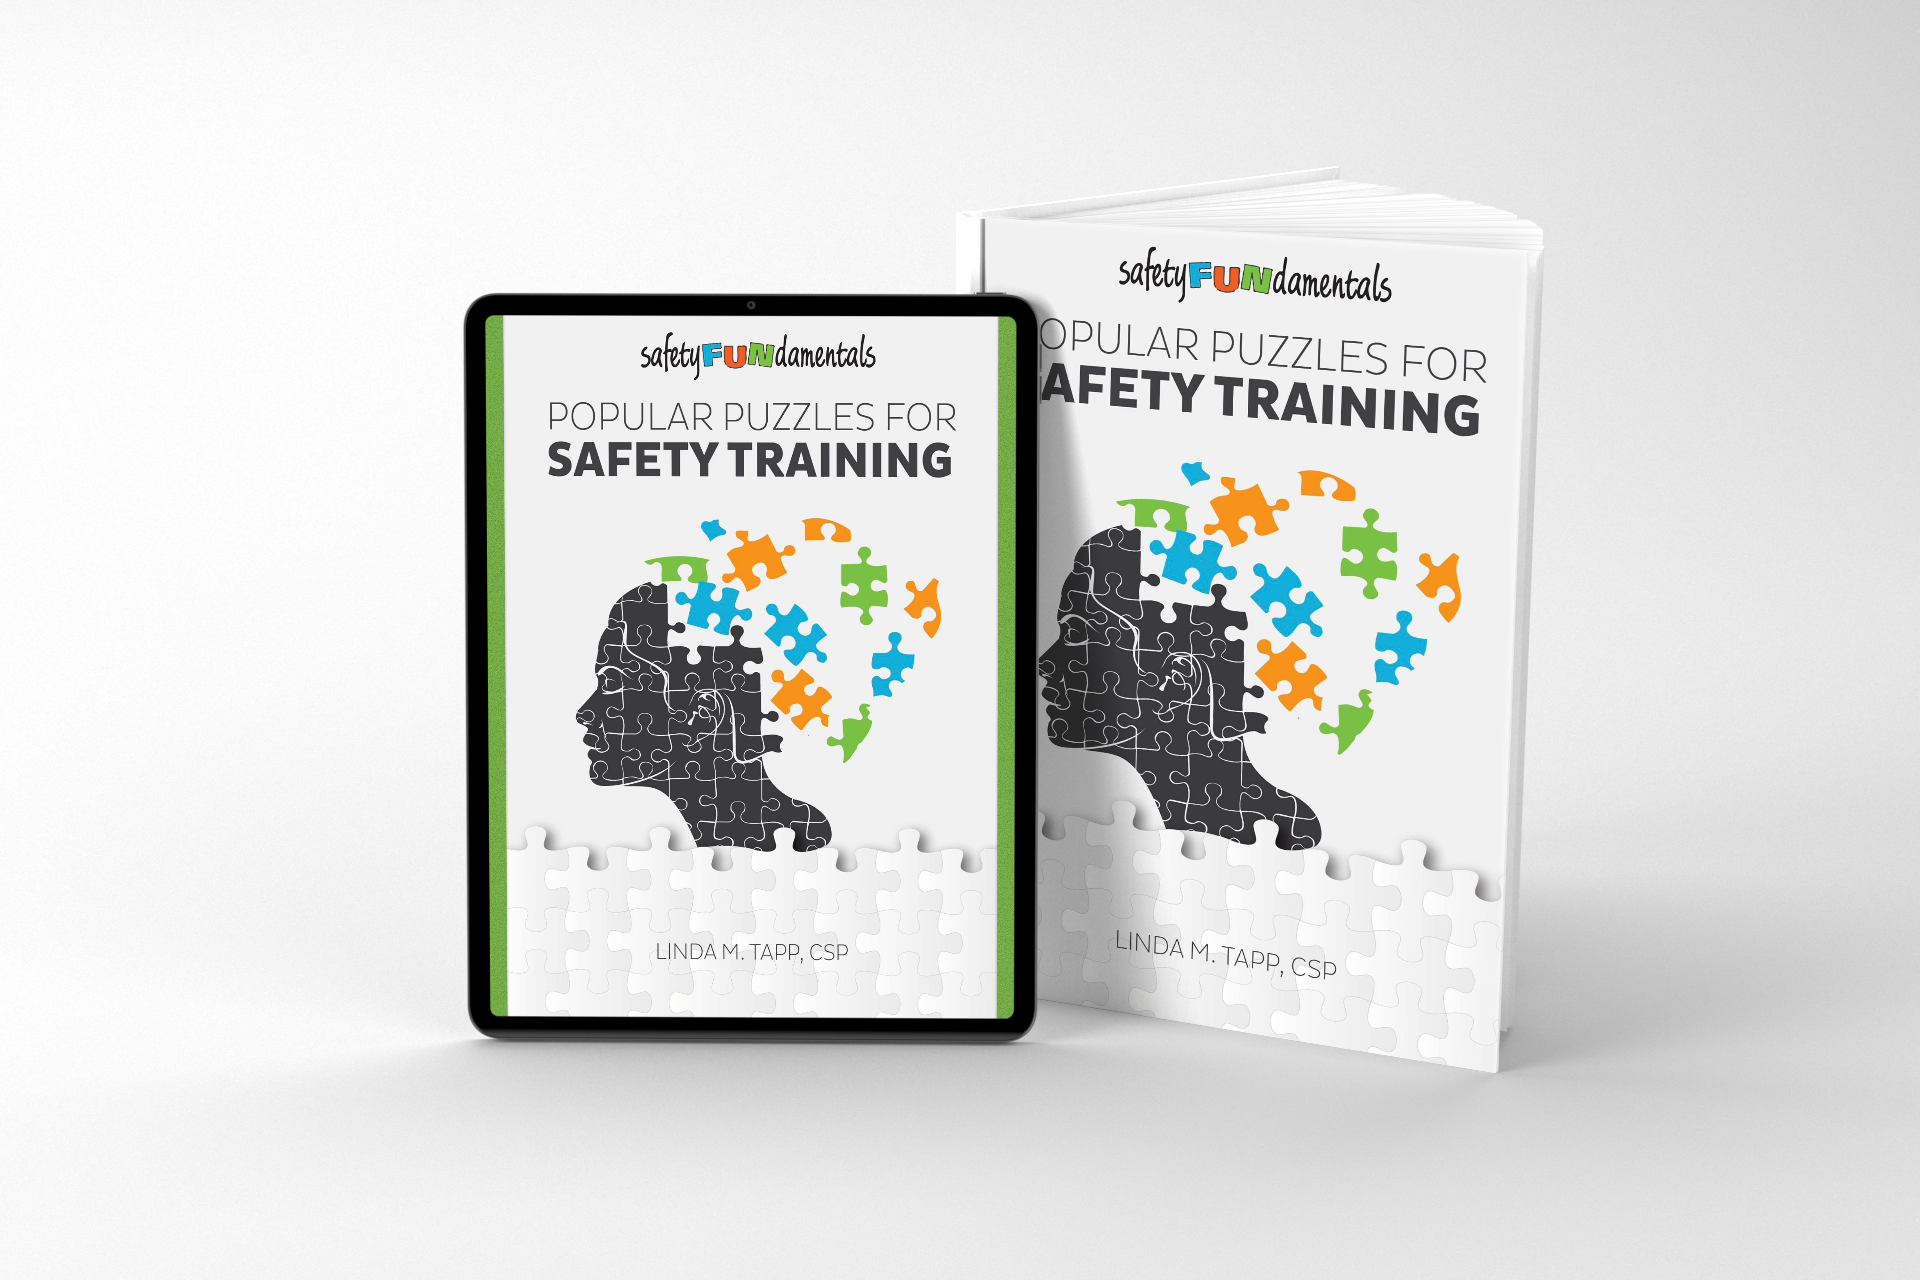 Dusting Off "Popular Puzzles for Safety Training"